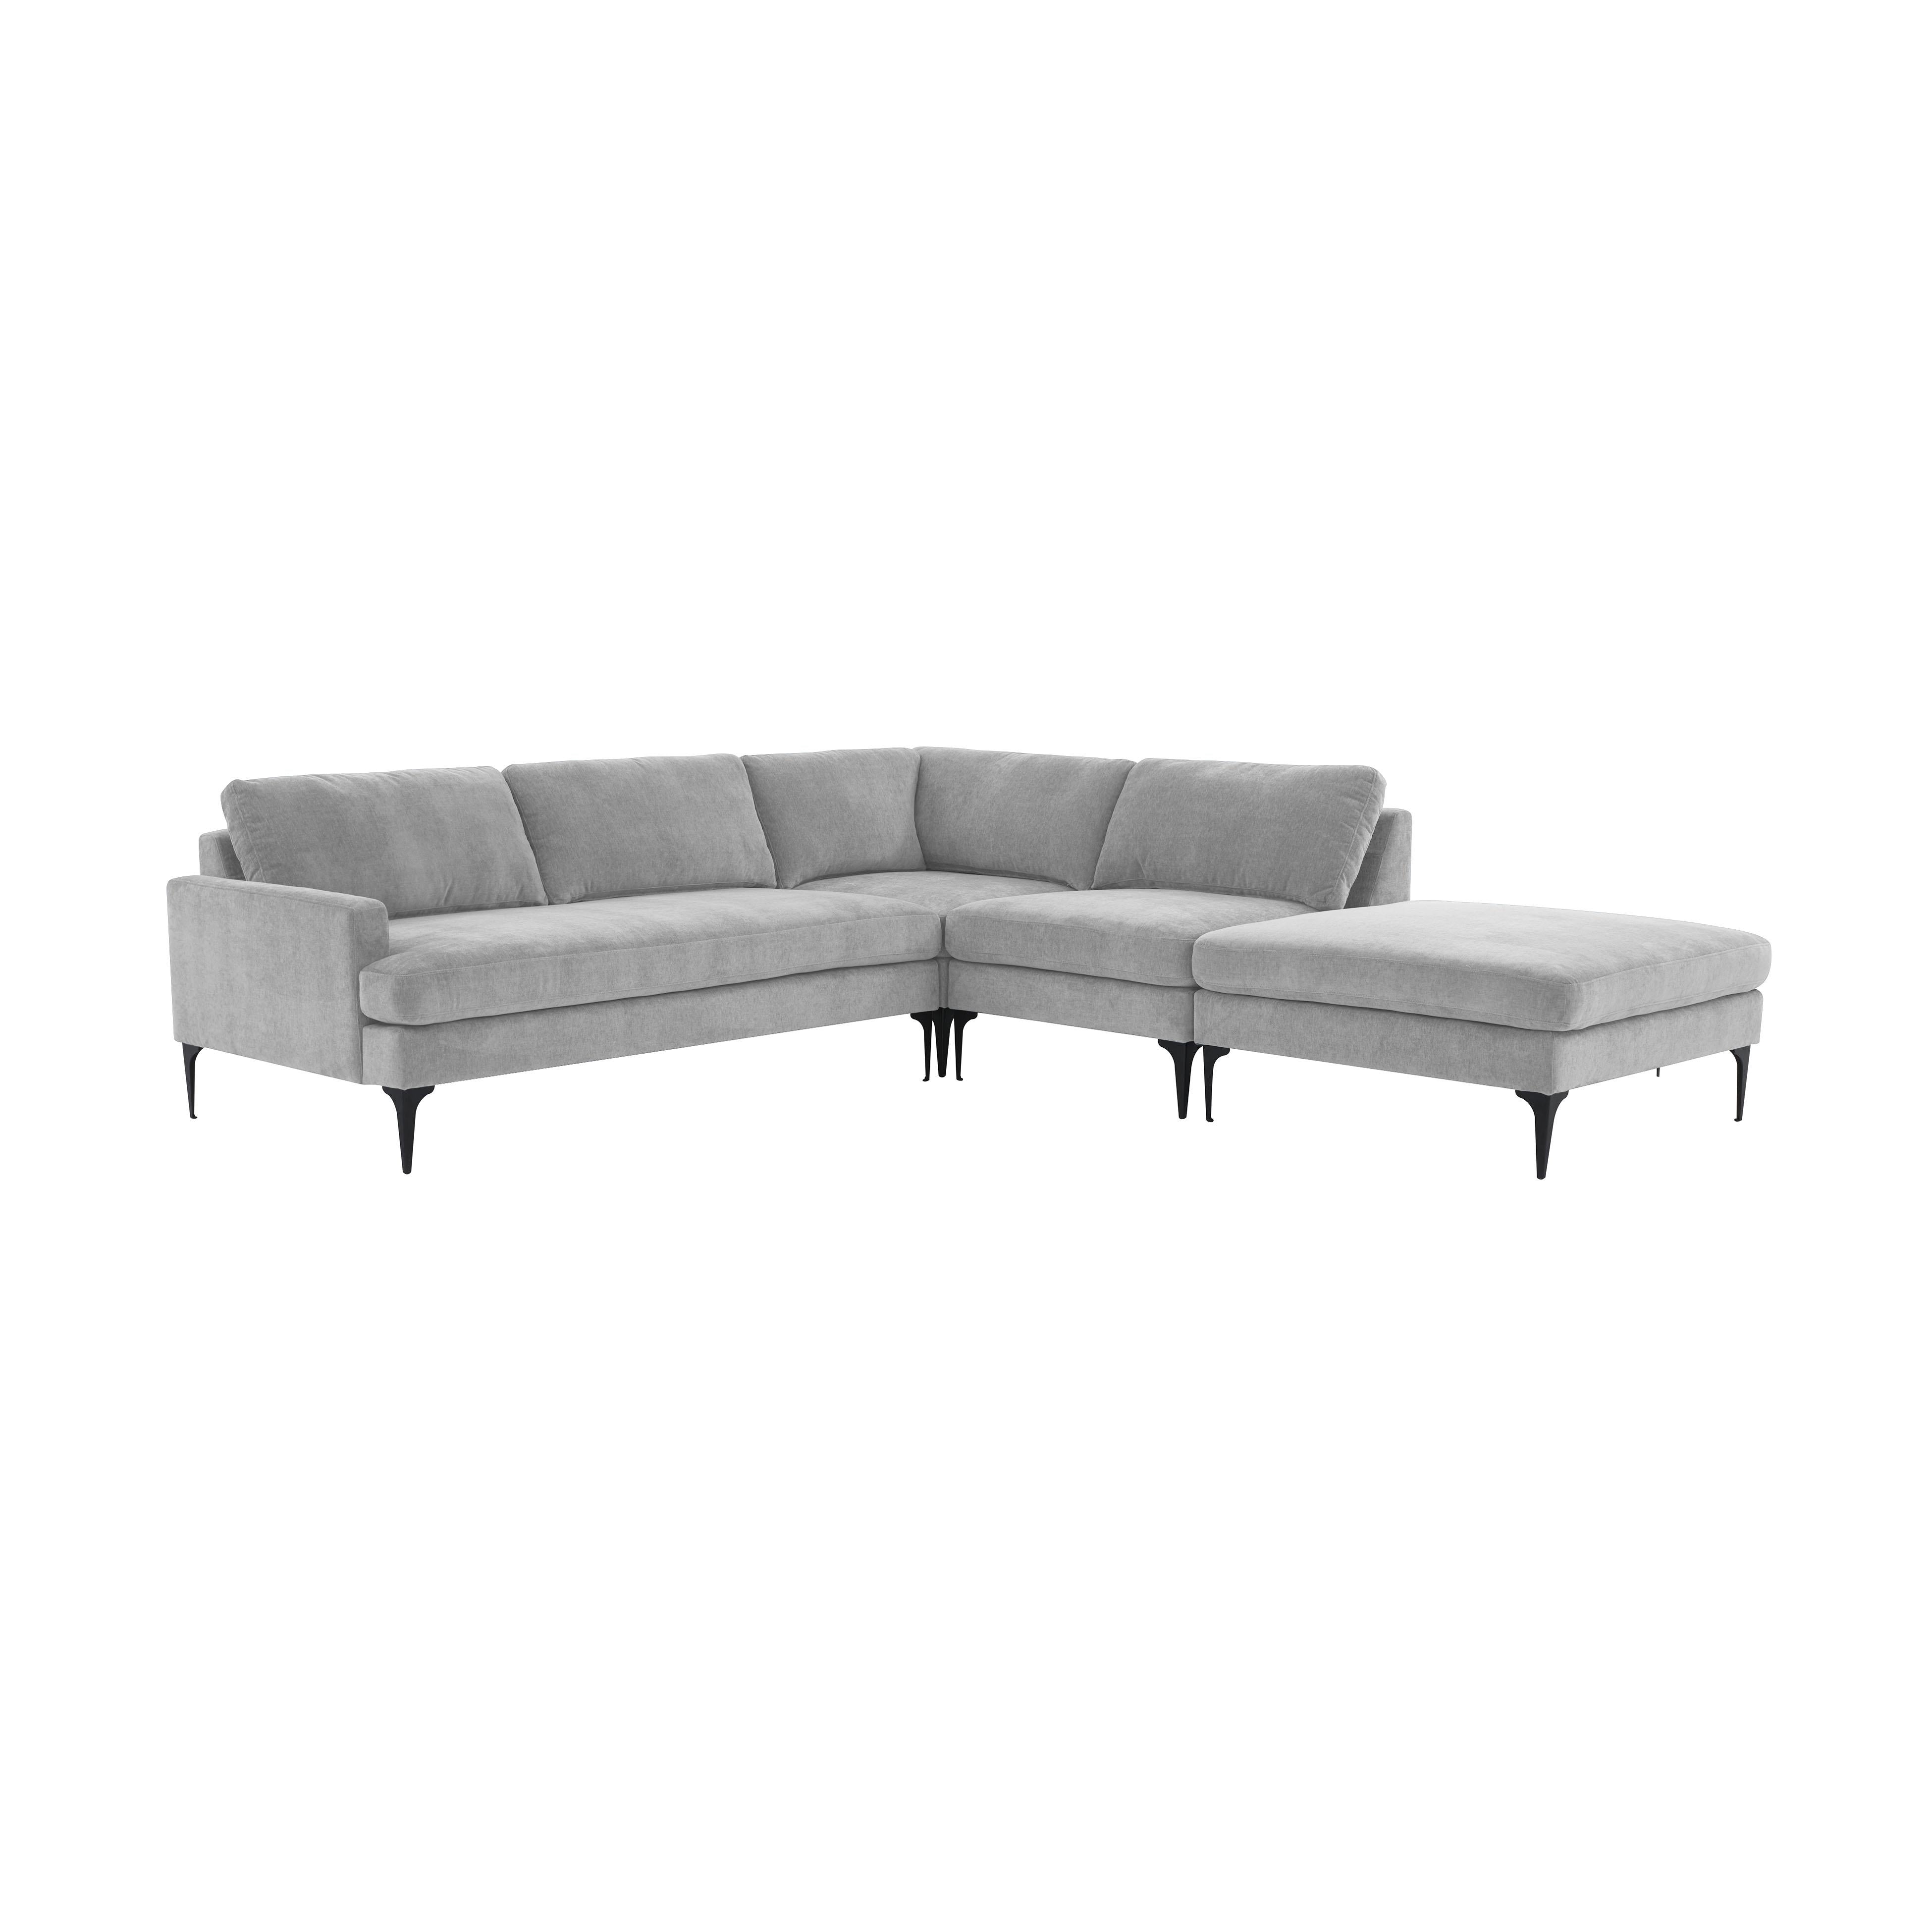 Tov Furniture Sectionals - Serena Gray Velvet Large RAF Chaise Sectional with Black Legs